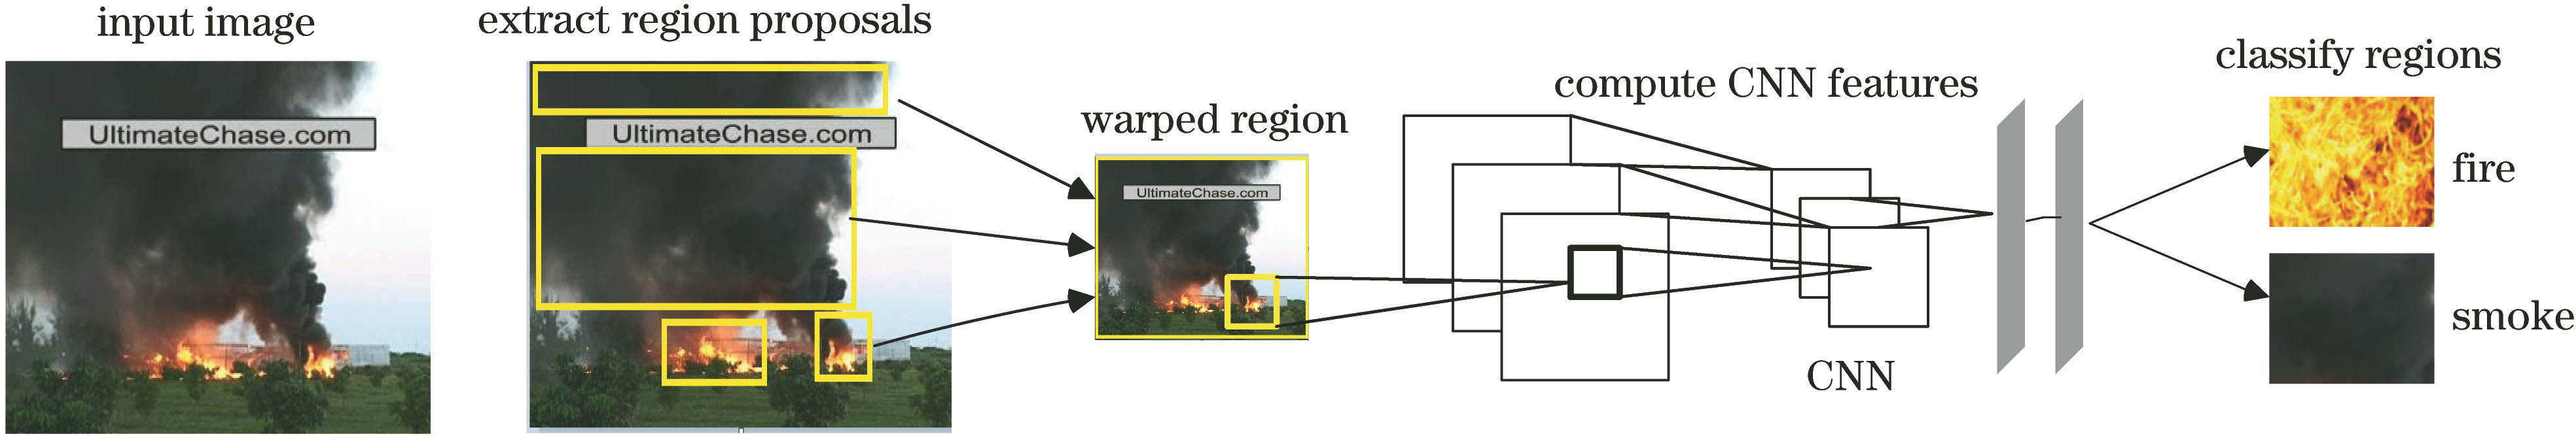 Schematic of forest fire detection network